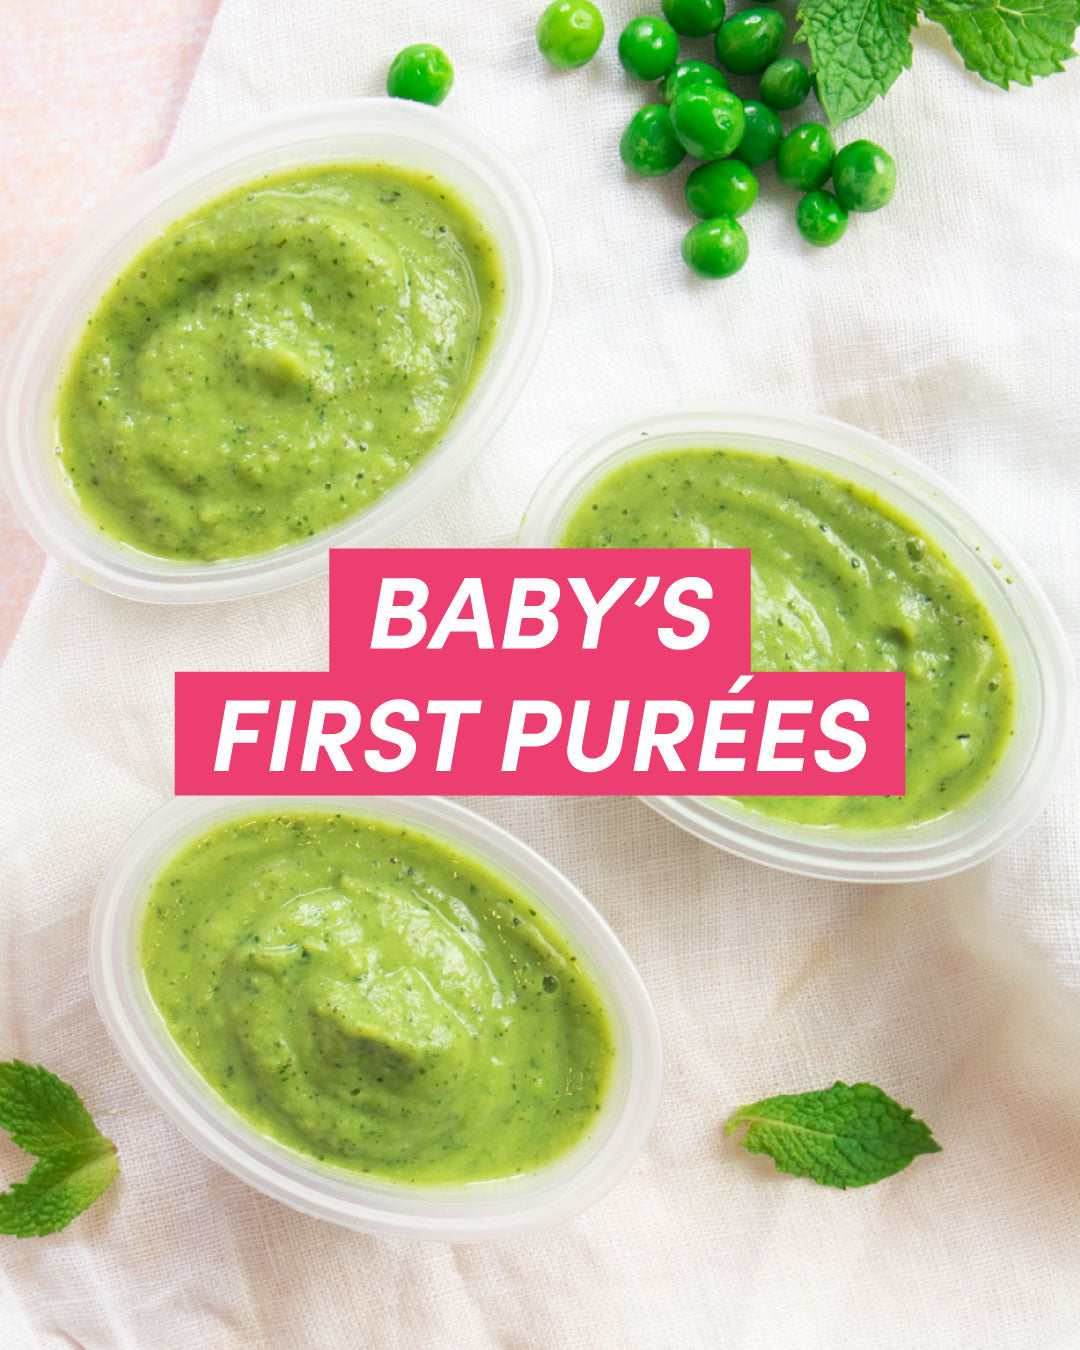 My Baby's First Purées